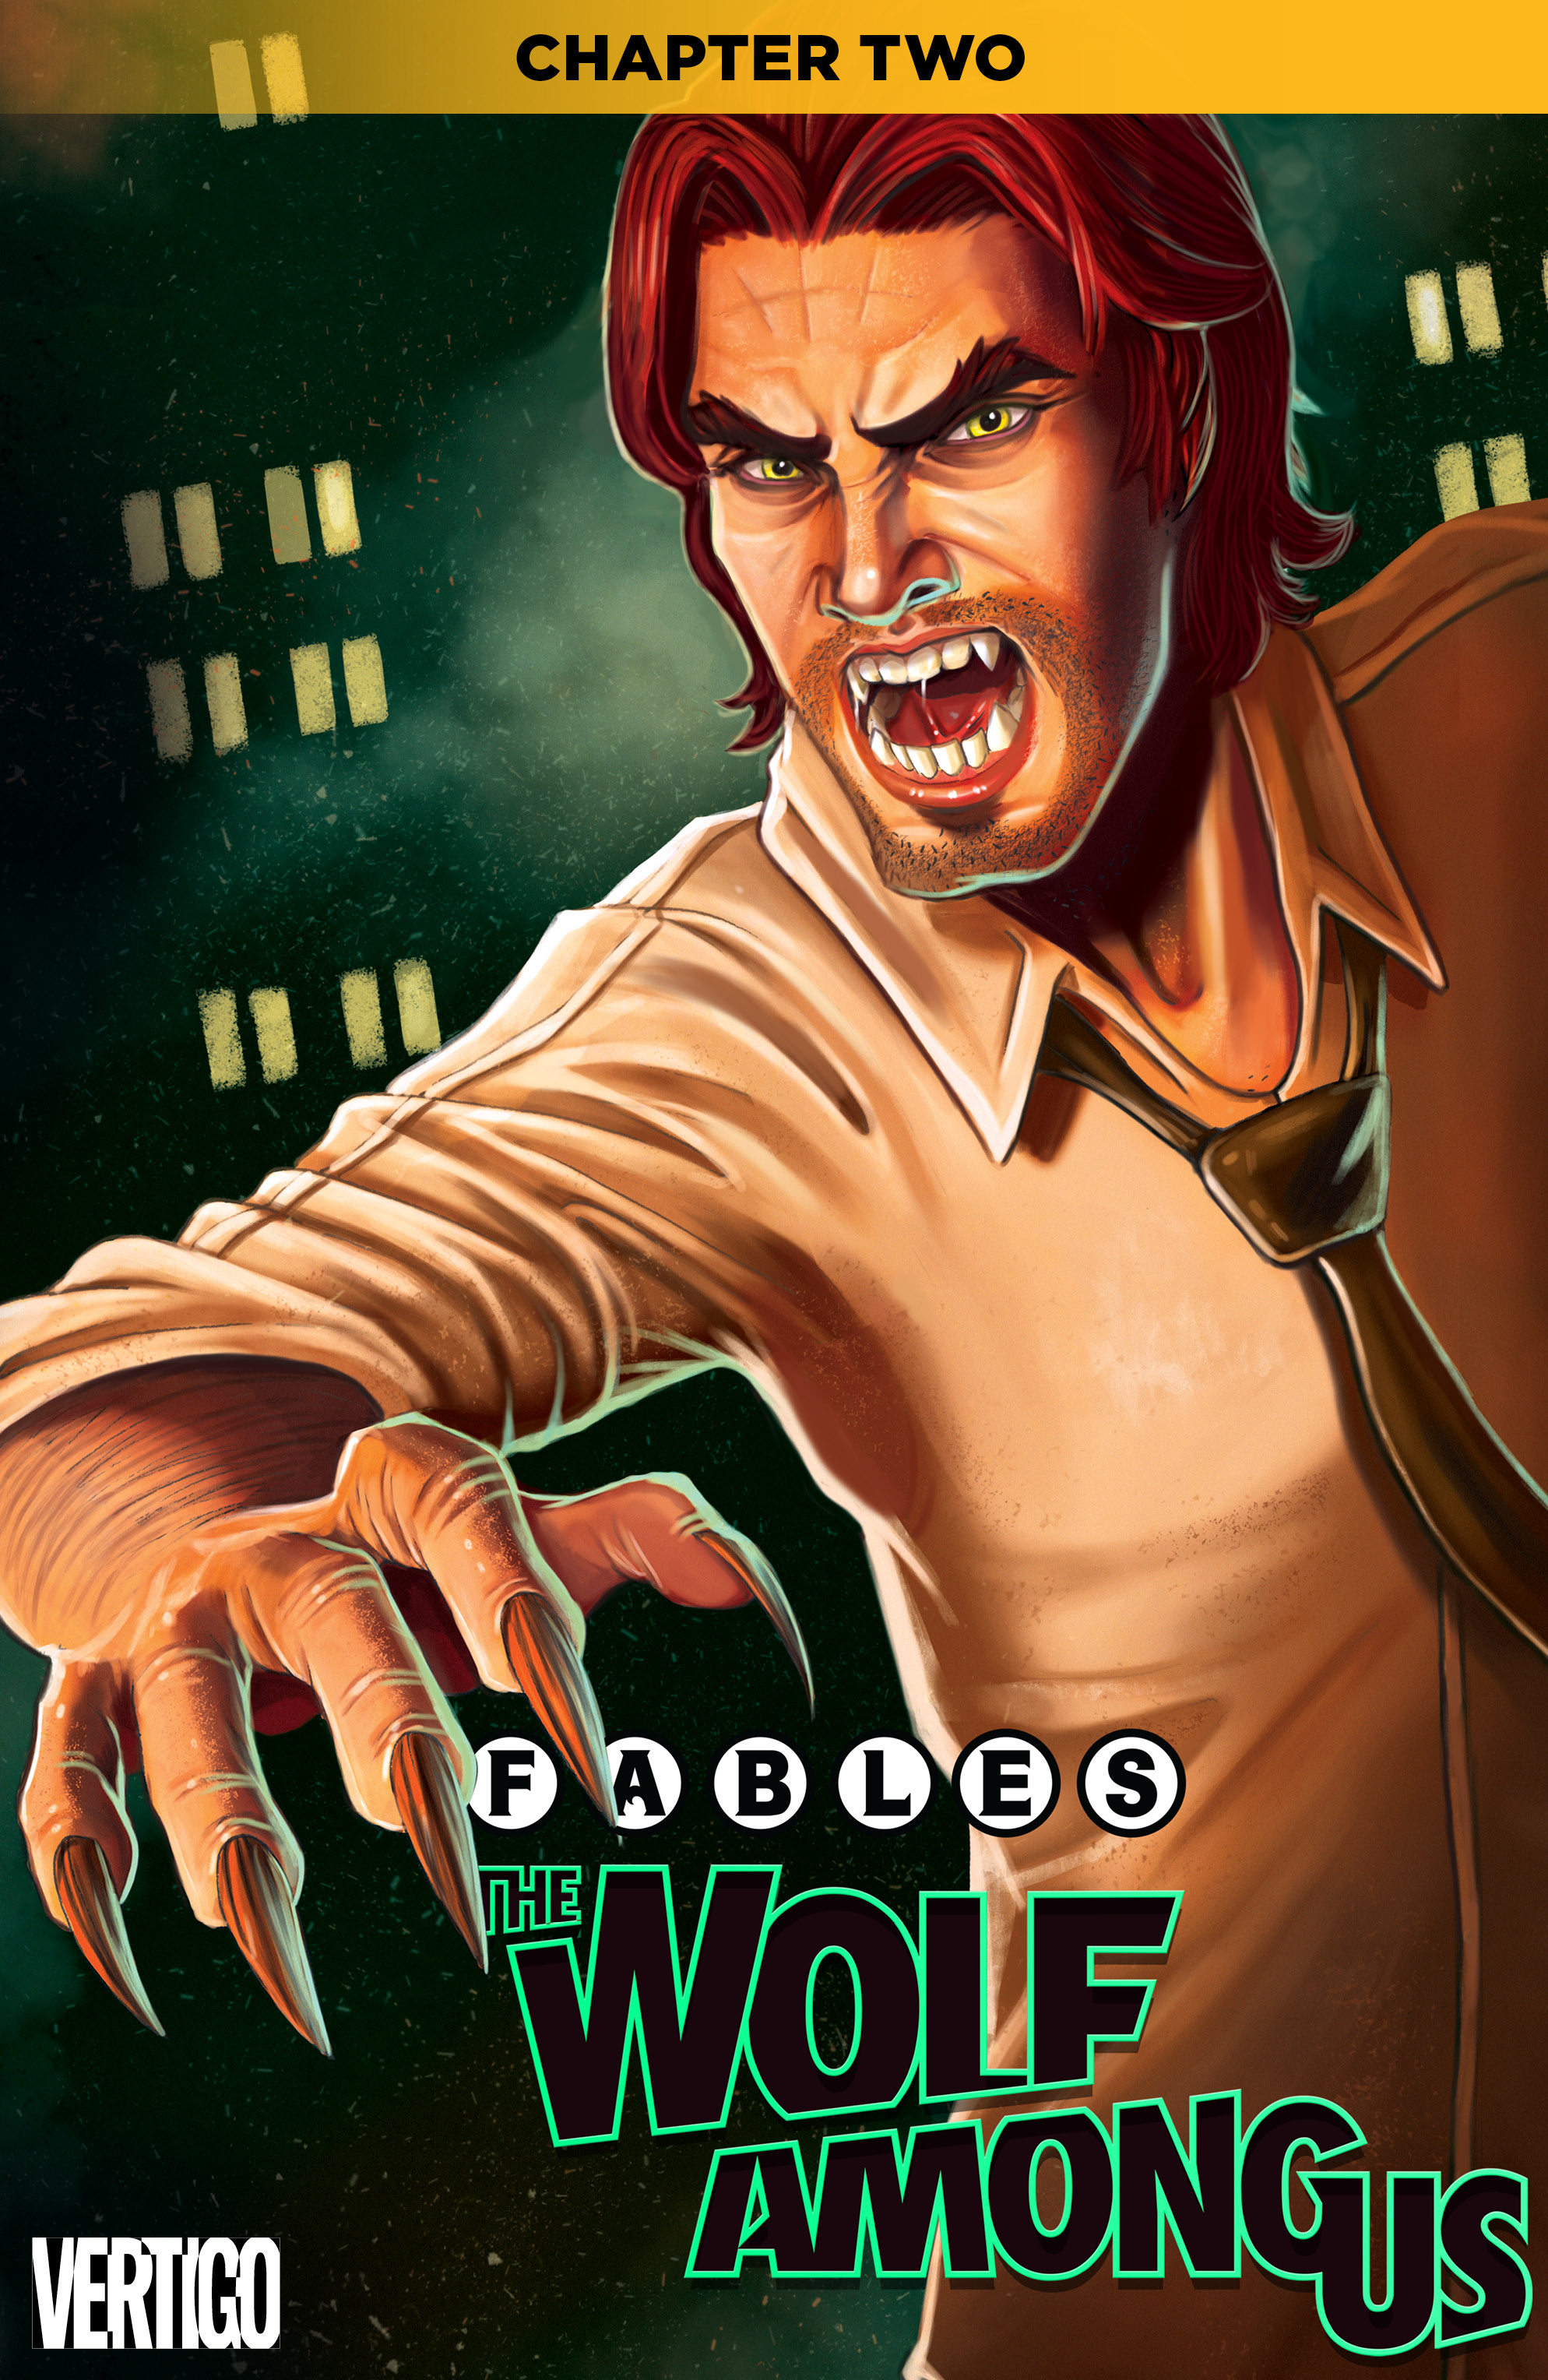 Fables: The Wolf Among Us #2 preview images